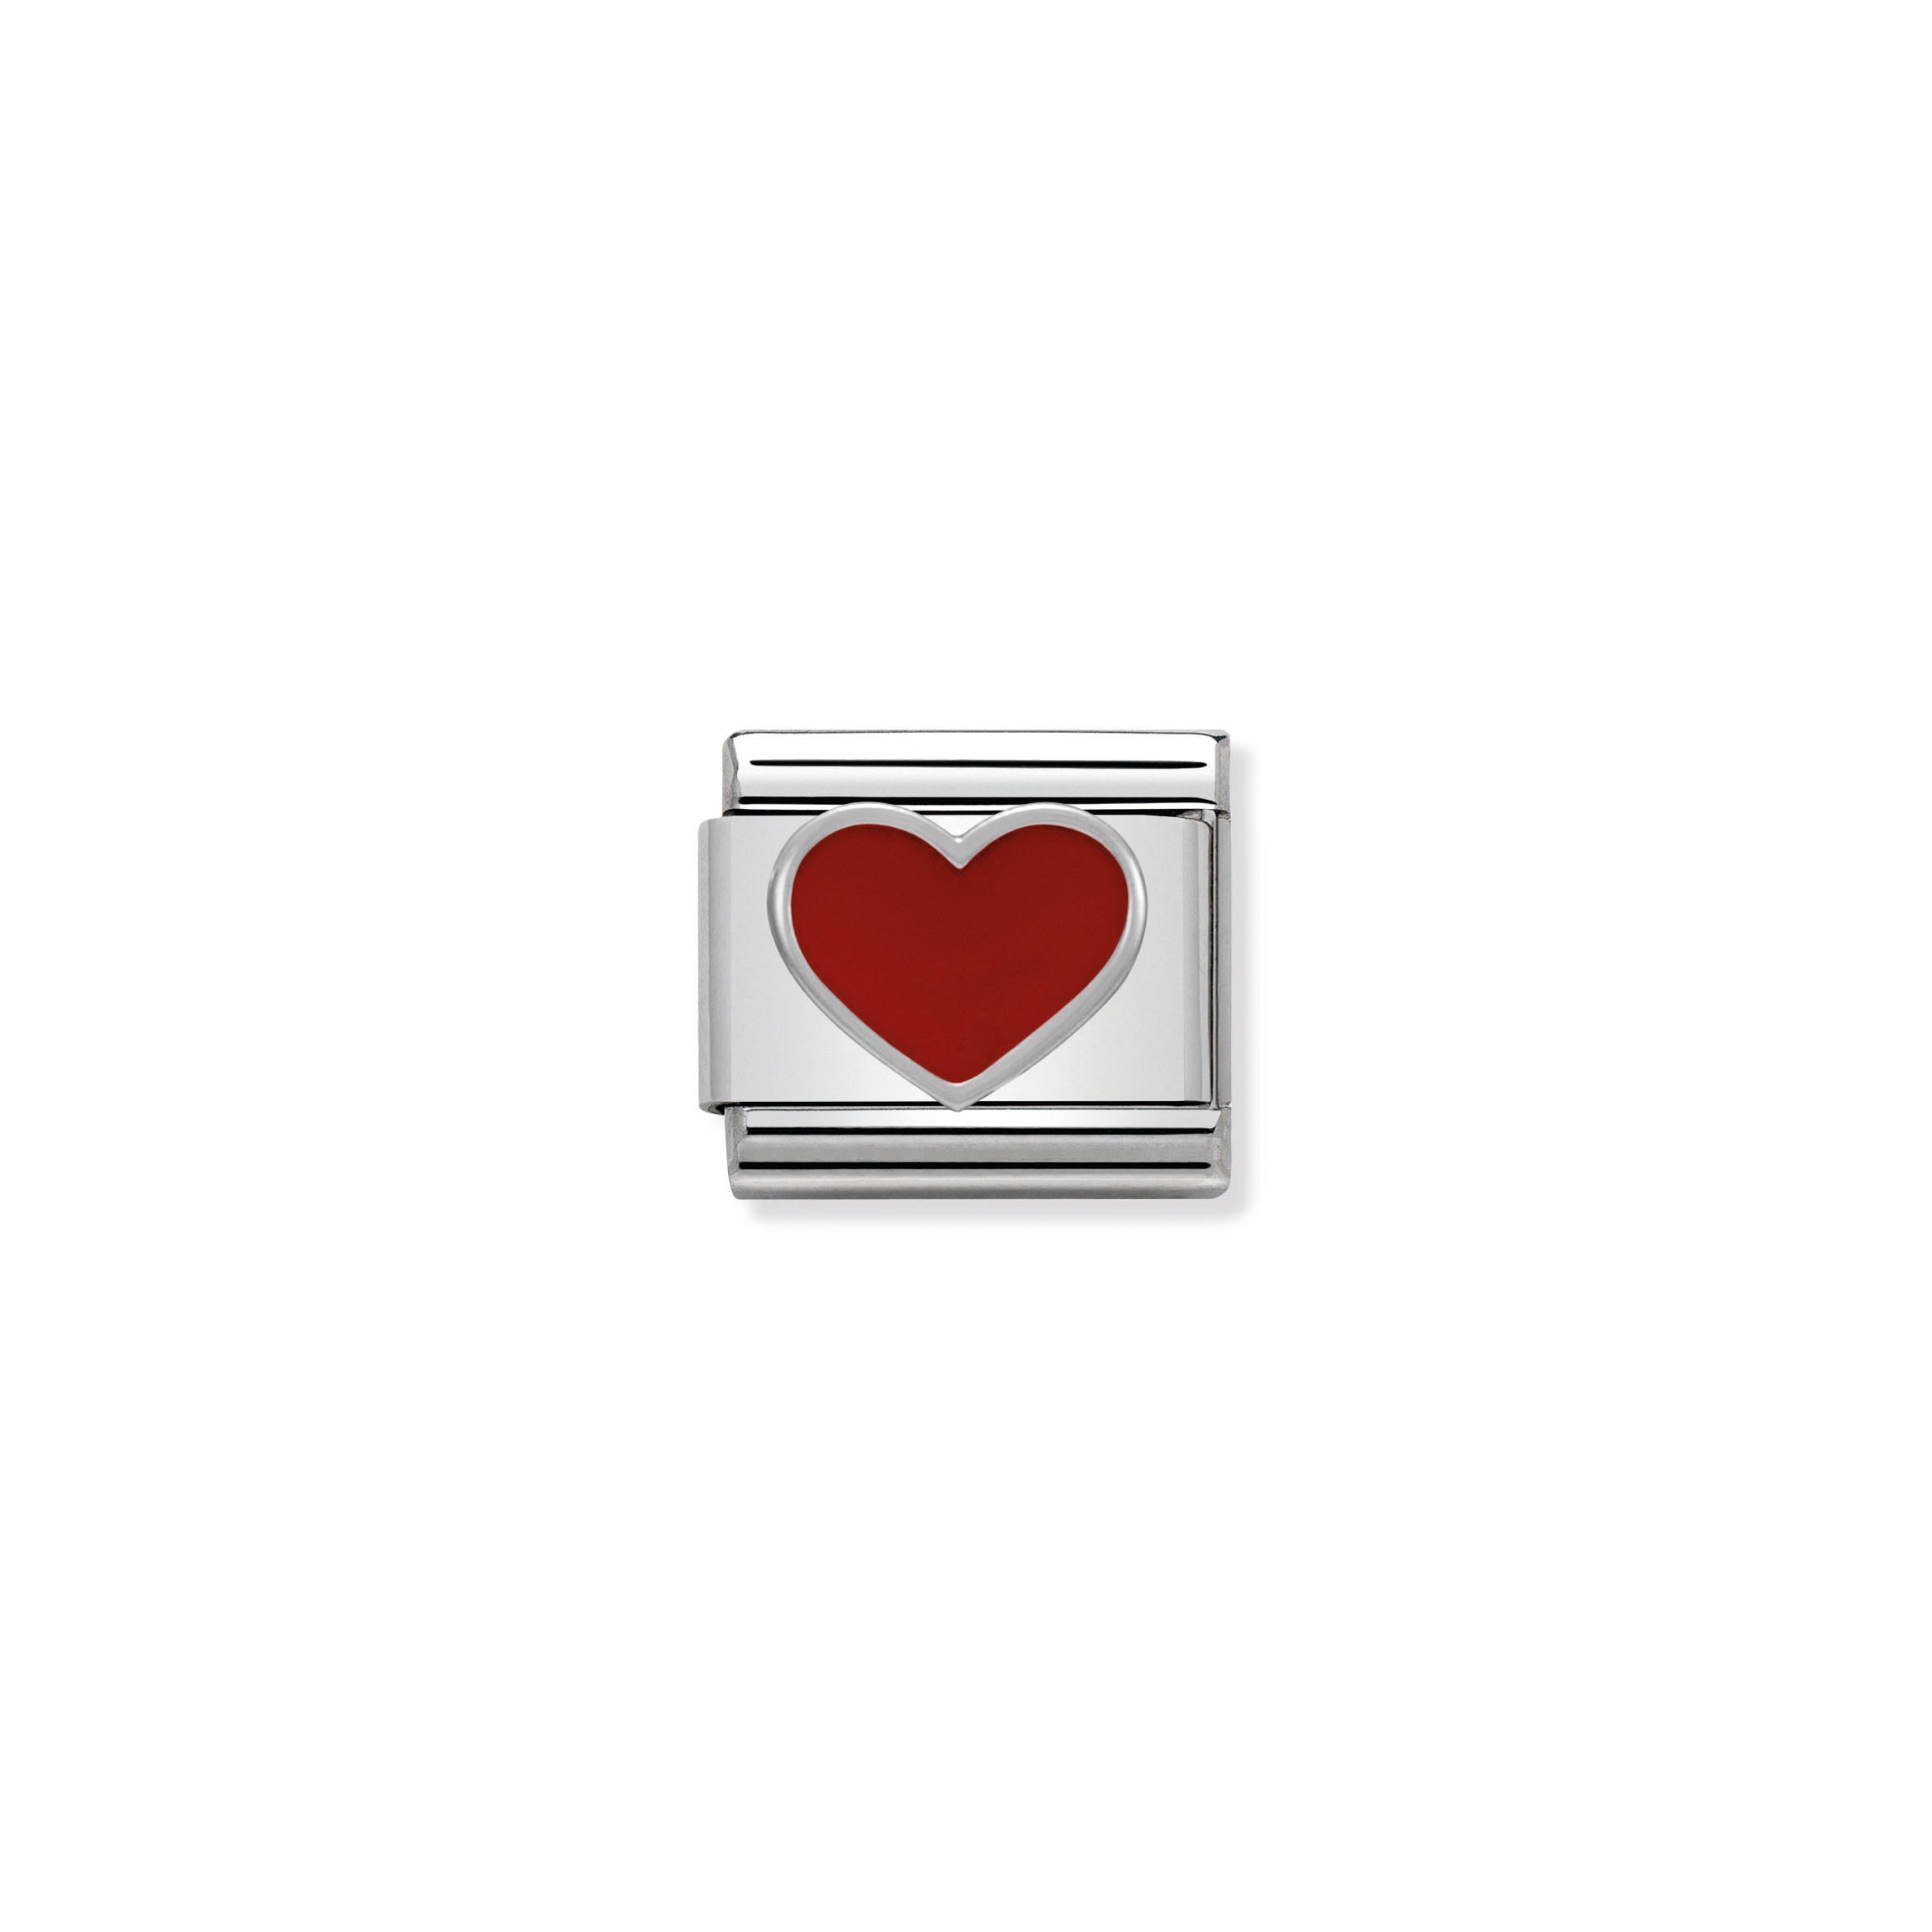 NOMINATION - Composable 330202 17 Classic SYMBOLS st/steel, enamel & silver 925  (Red Heart)